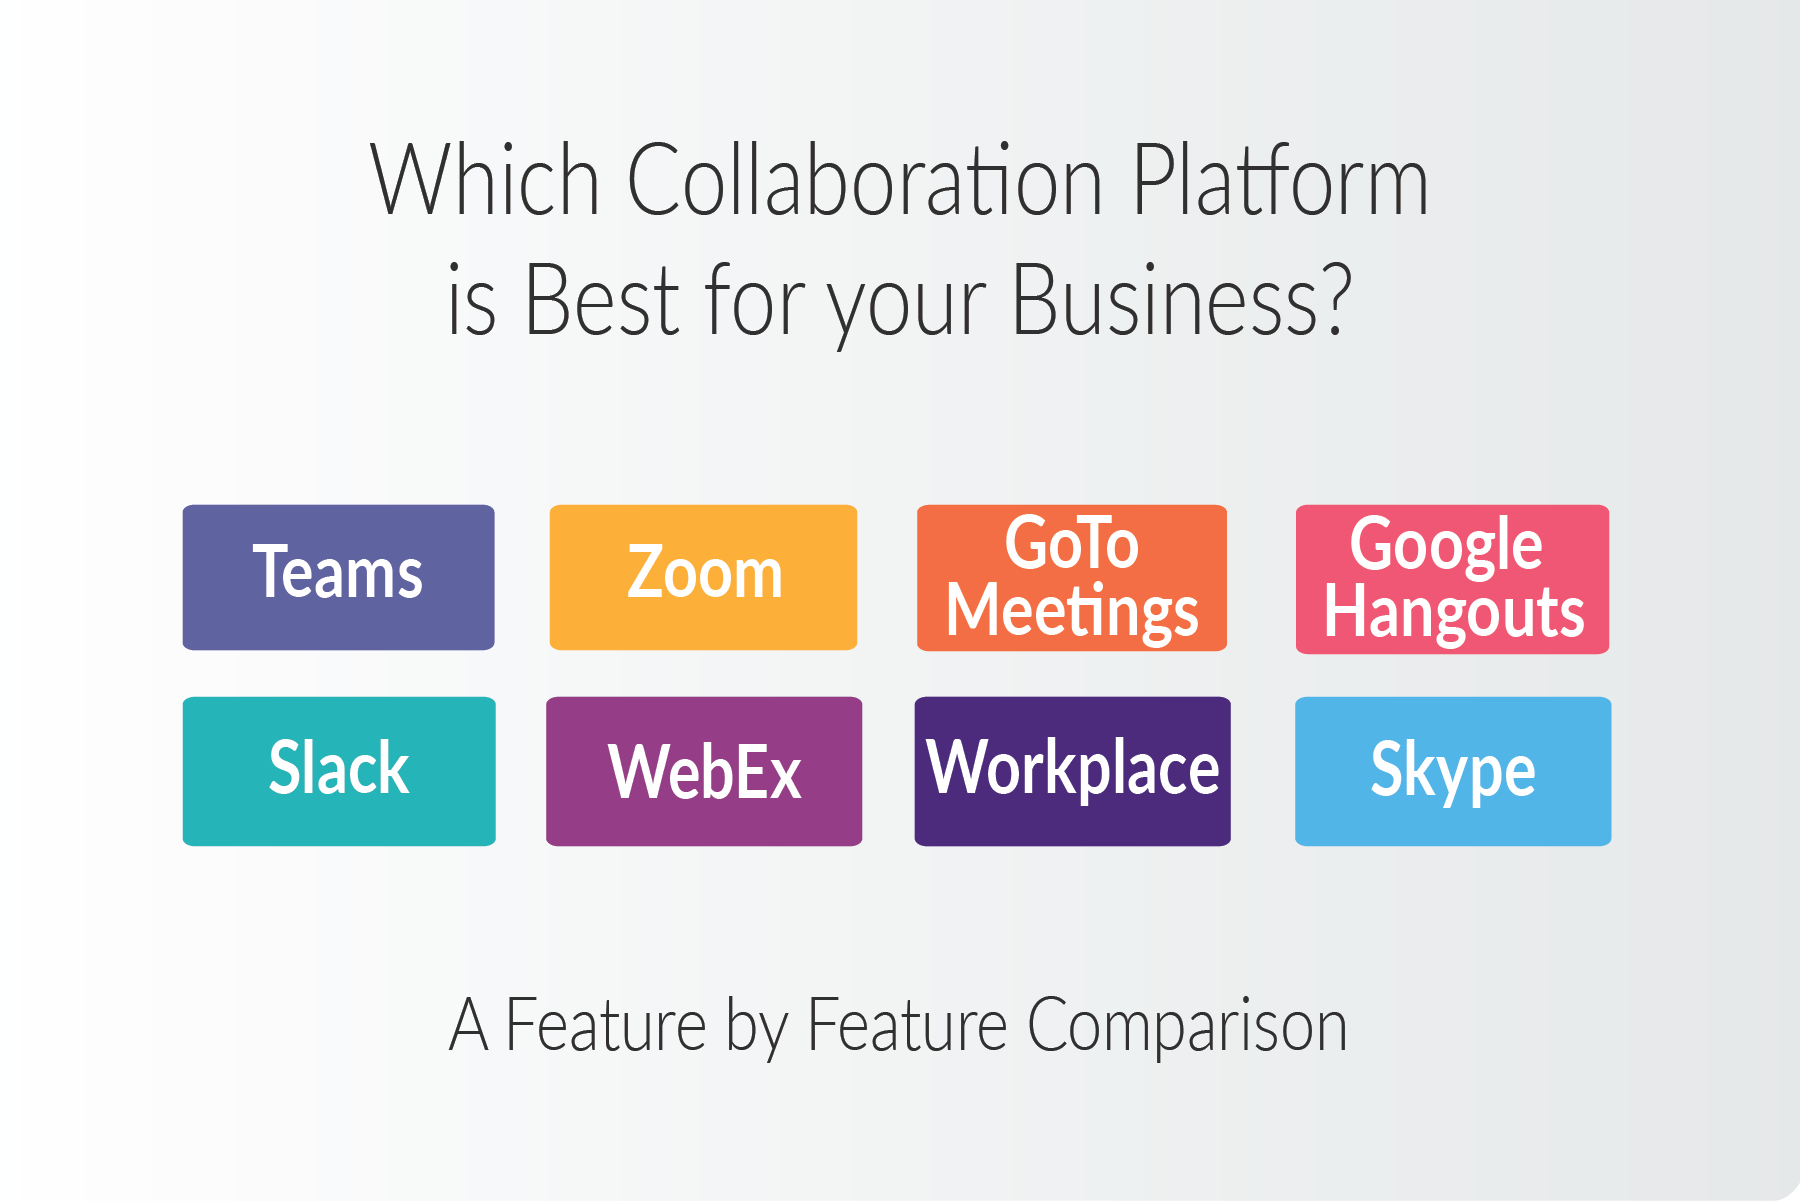 Which Collaboration Platform is Best for Your Business?